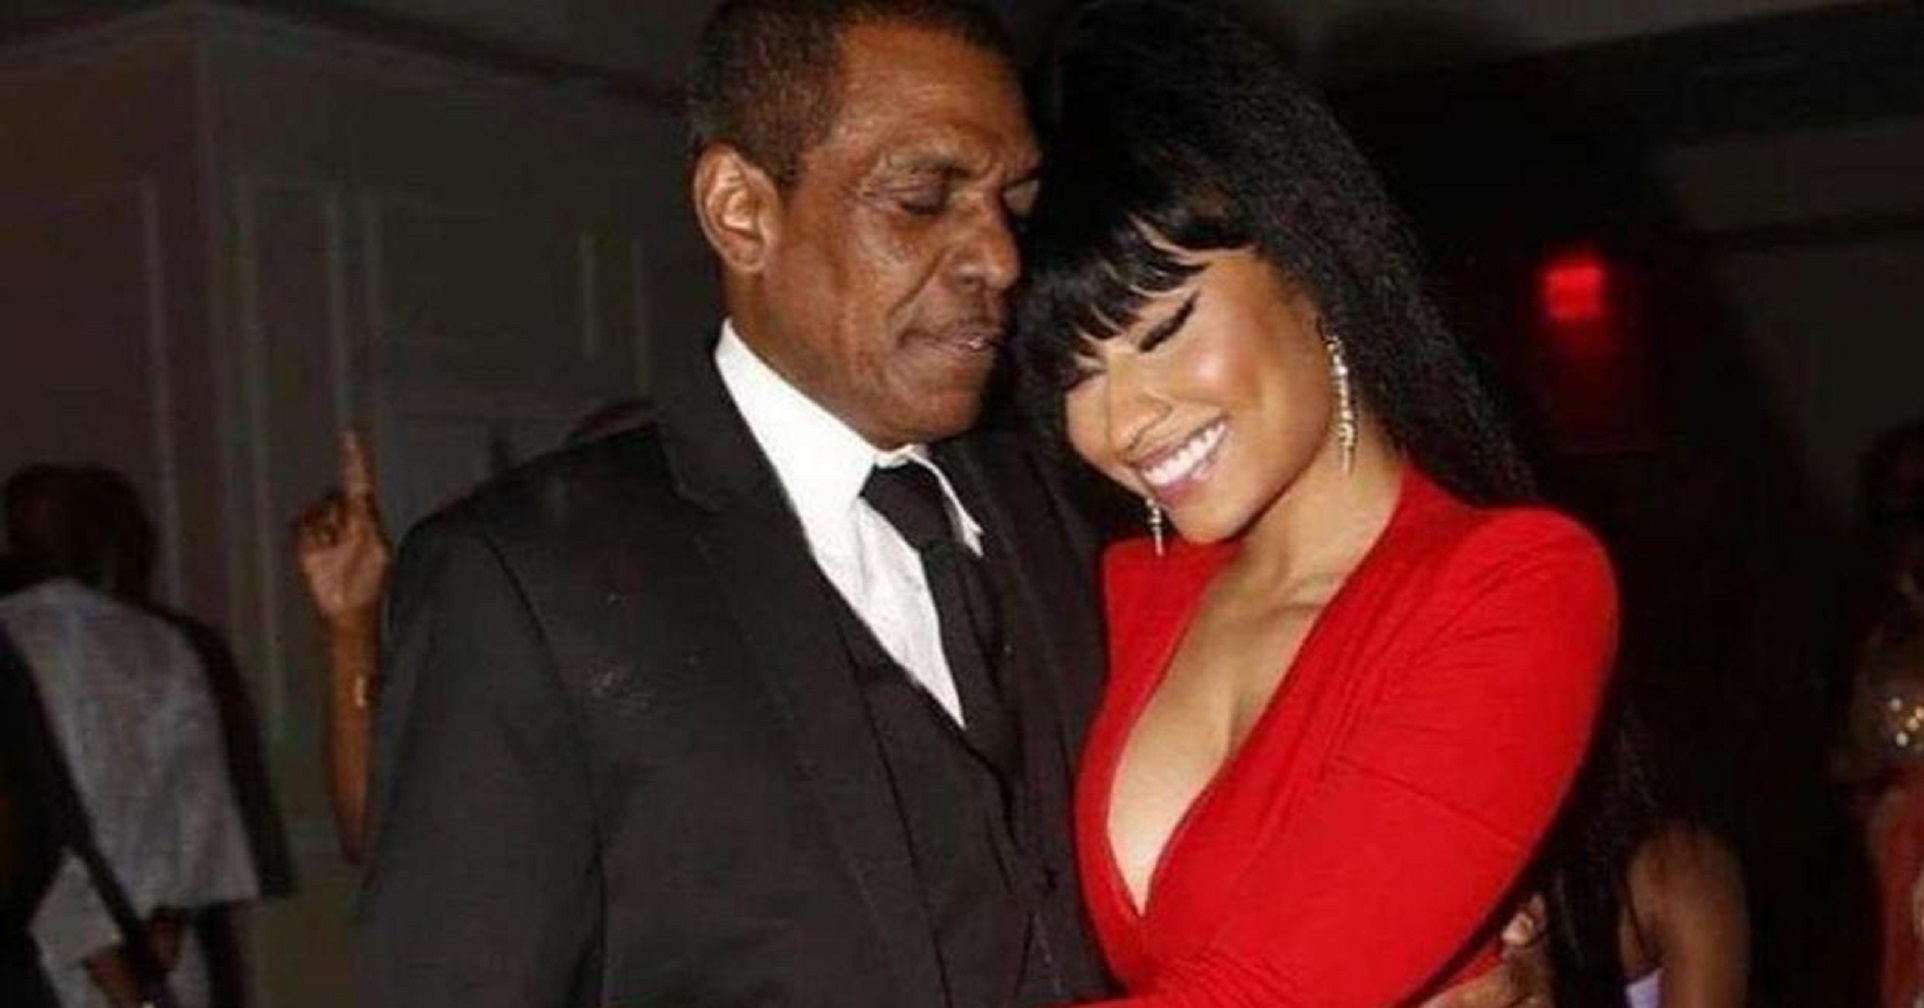 Nicki Minaj Breaks Silence On Her Father’s Passing, “Most Devastating Loss Of My Life”